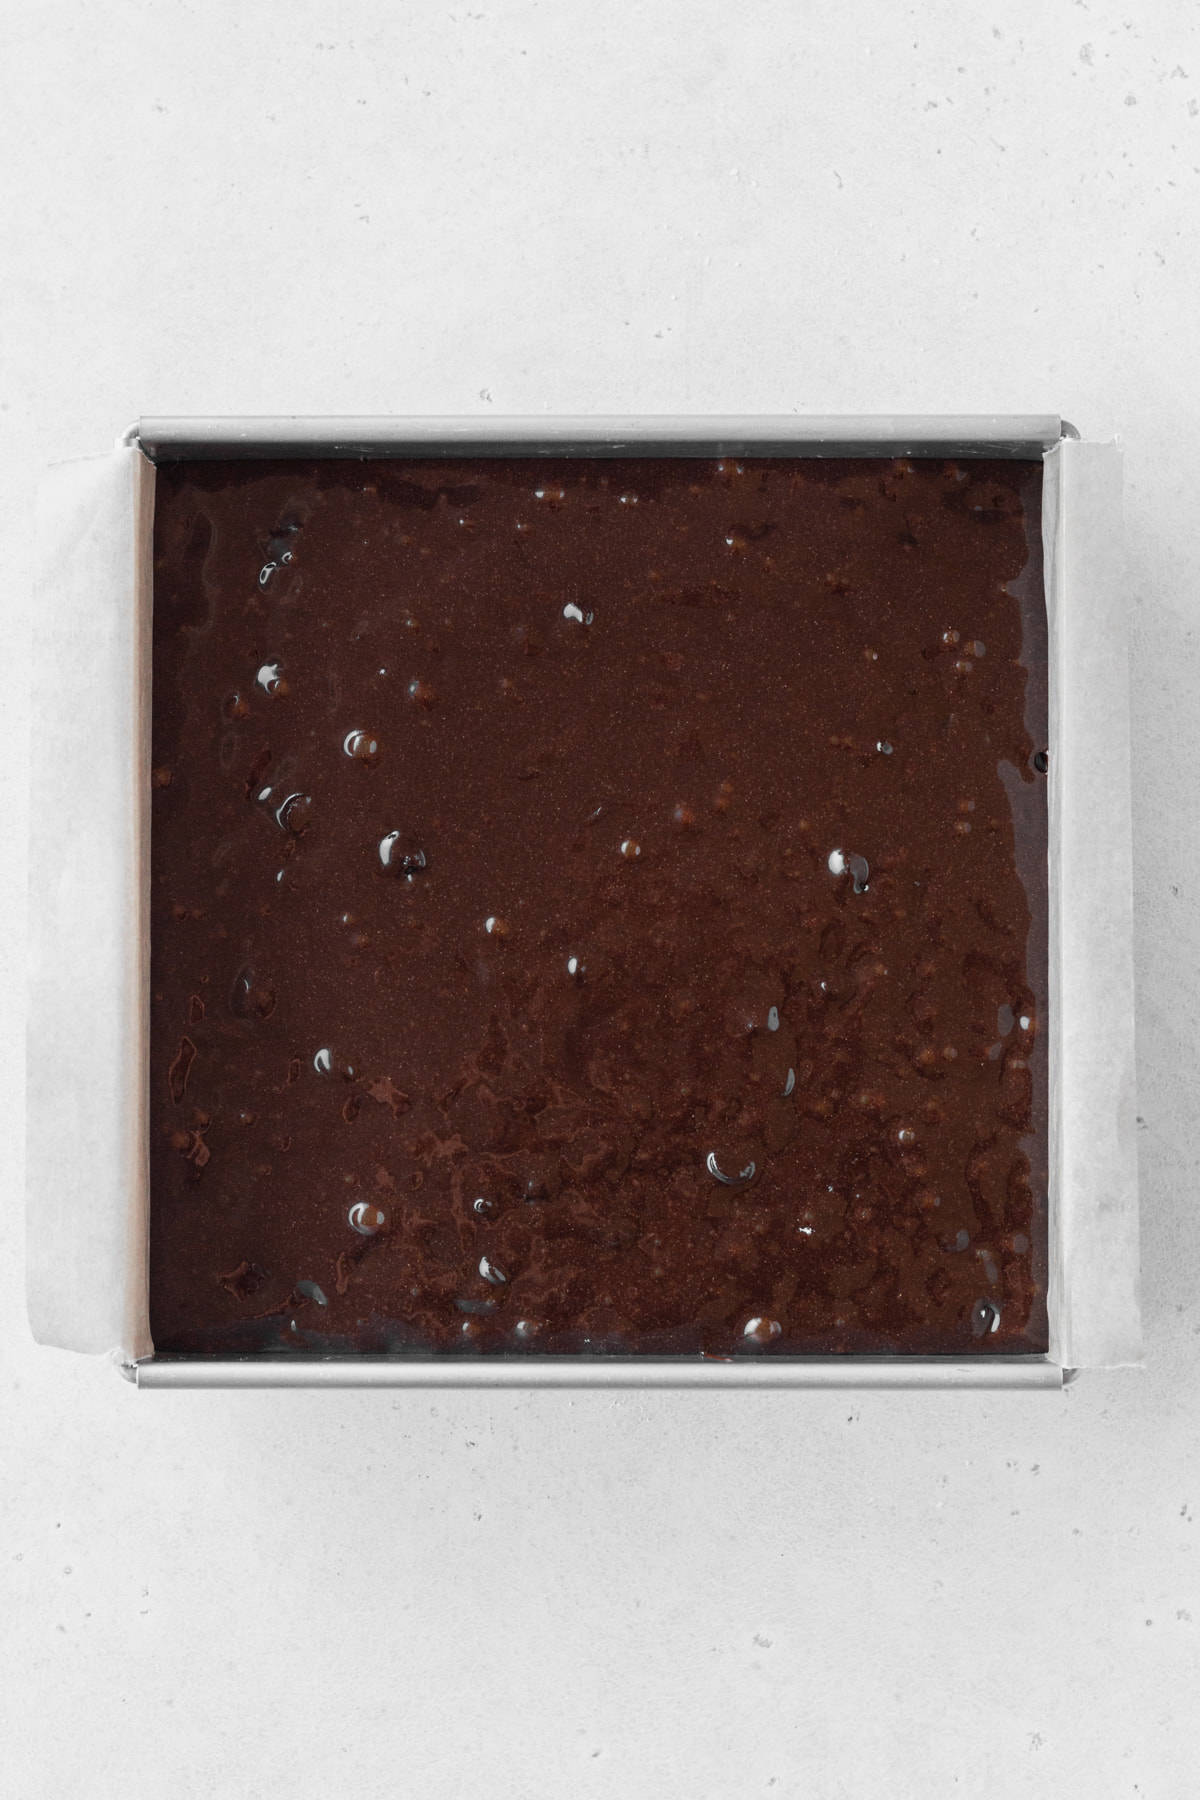 Gluten-free brownie batter poured into a square baking pan.